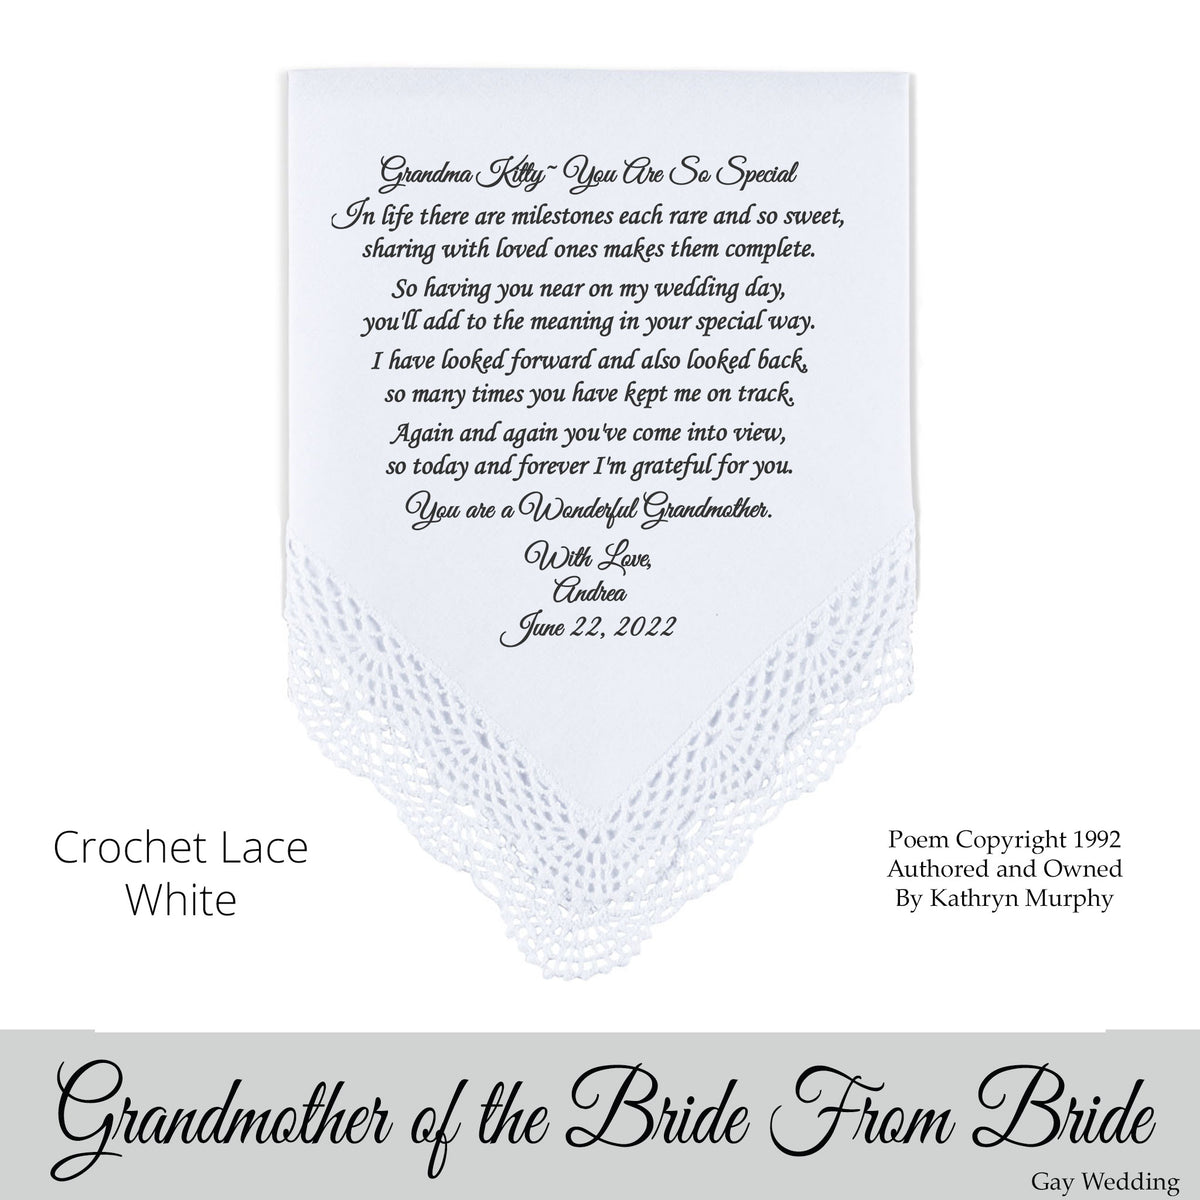 Gay Wedding Gift for the Grandmother of the Bride poem printed wedding hankie